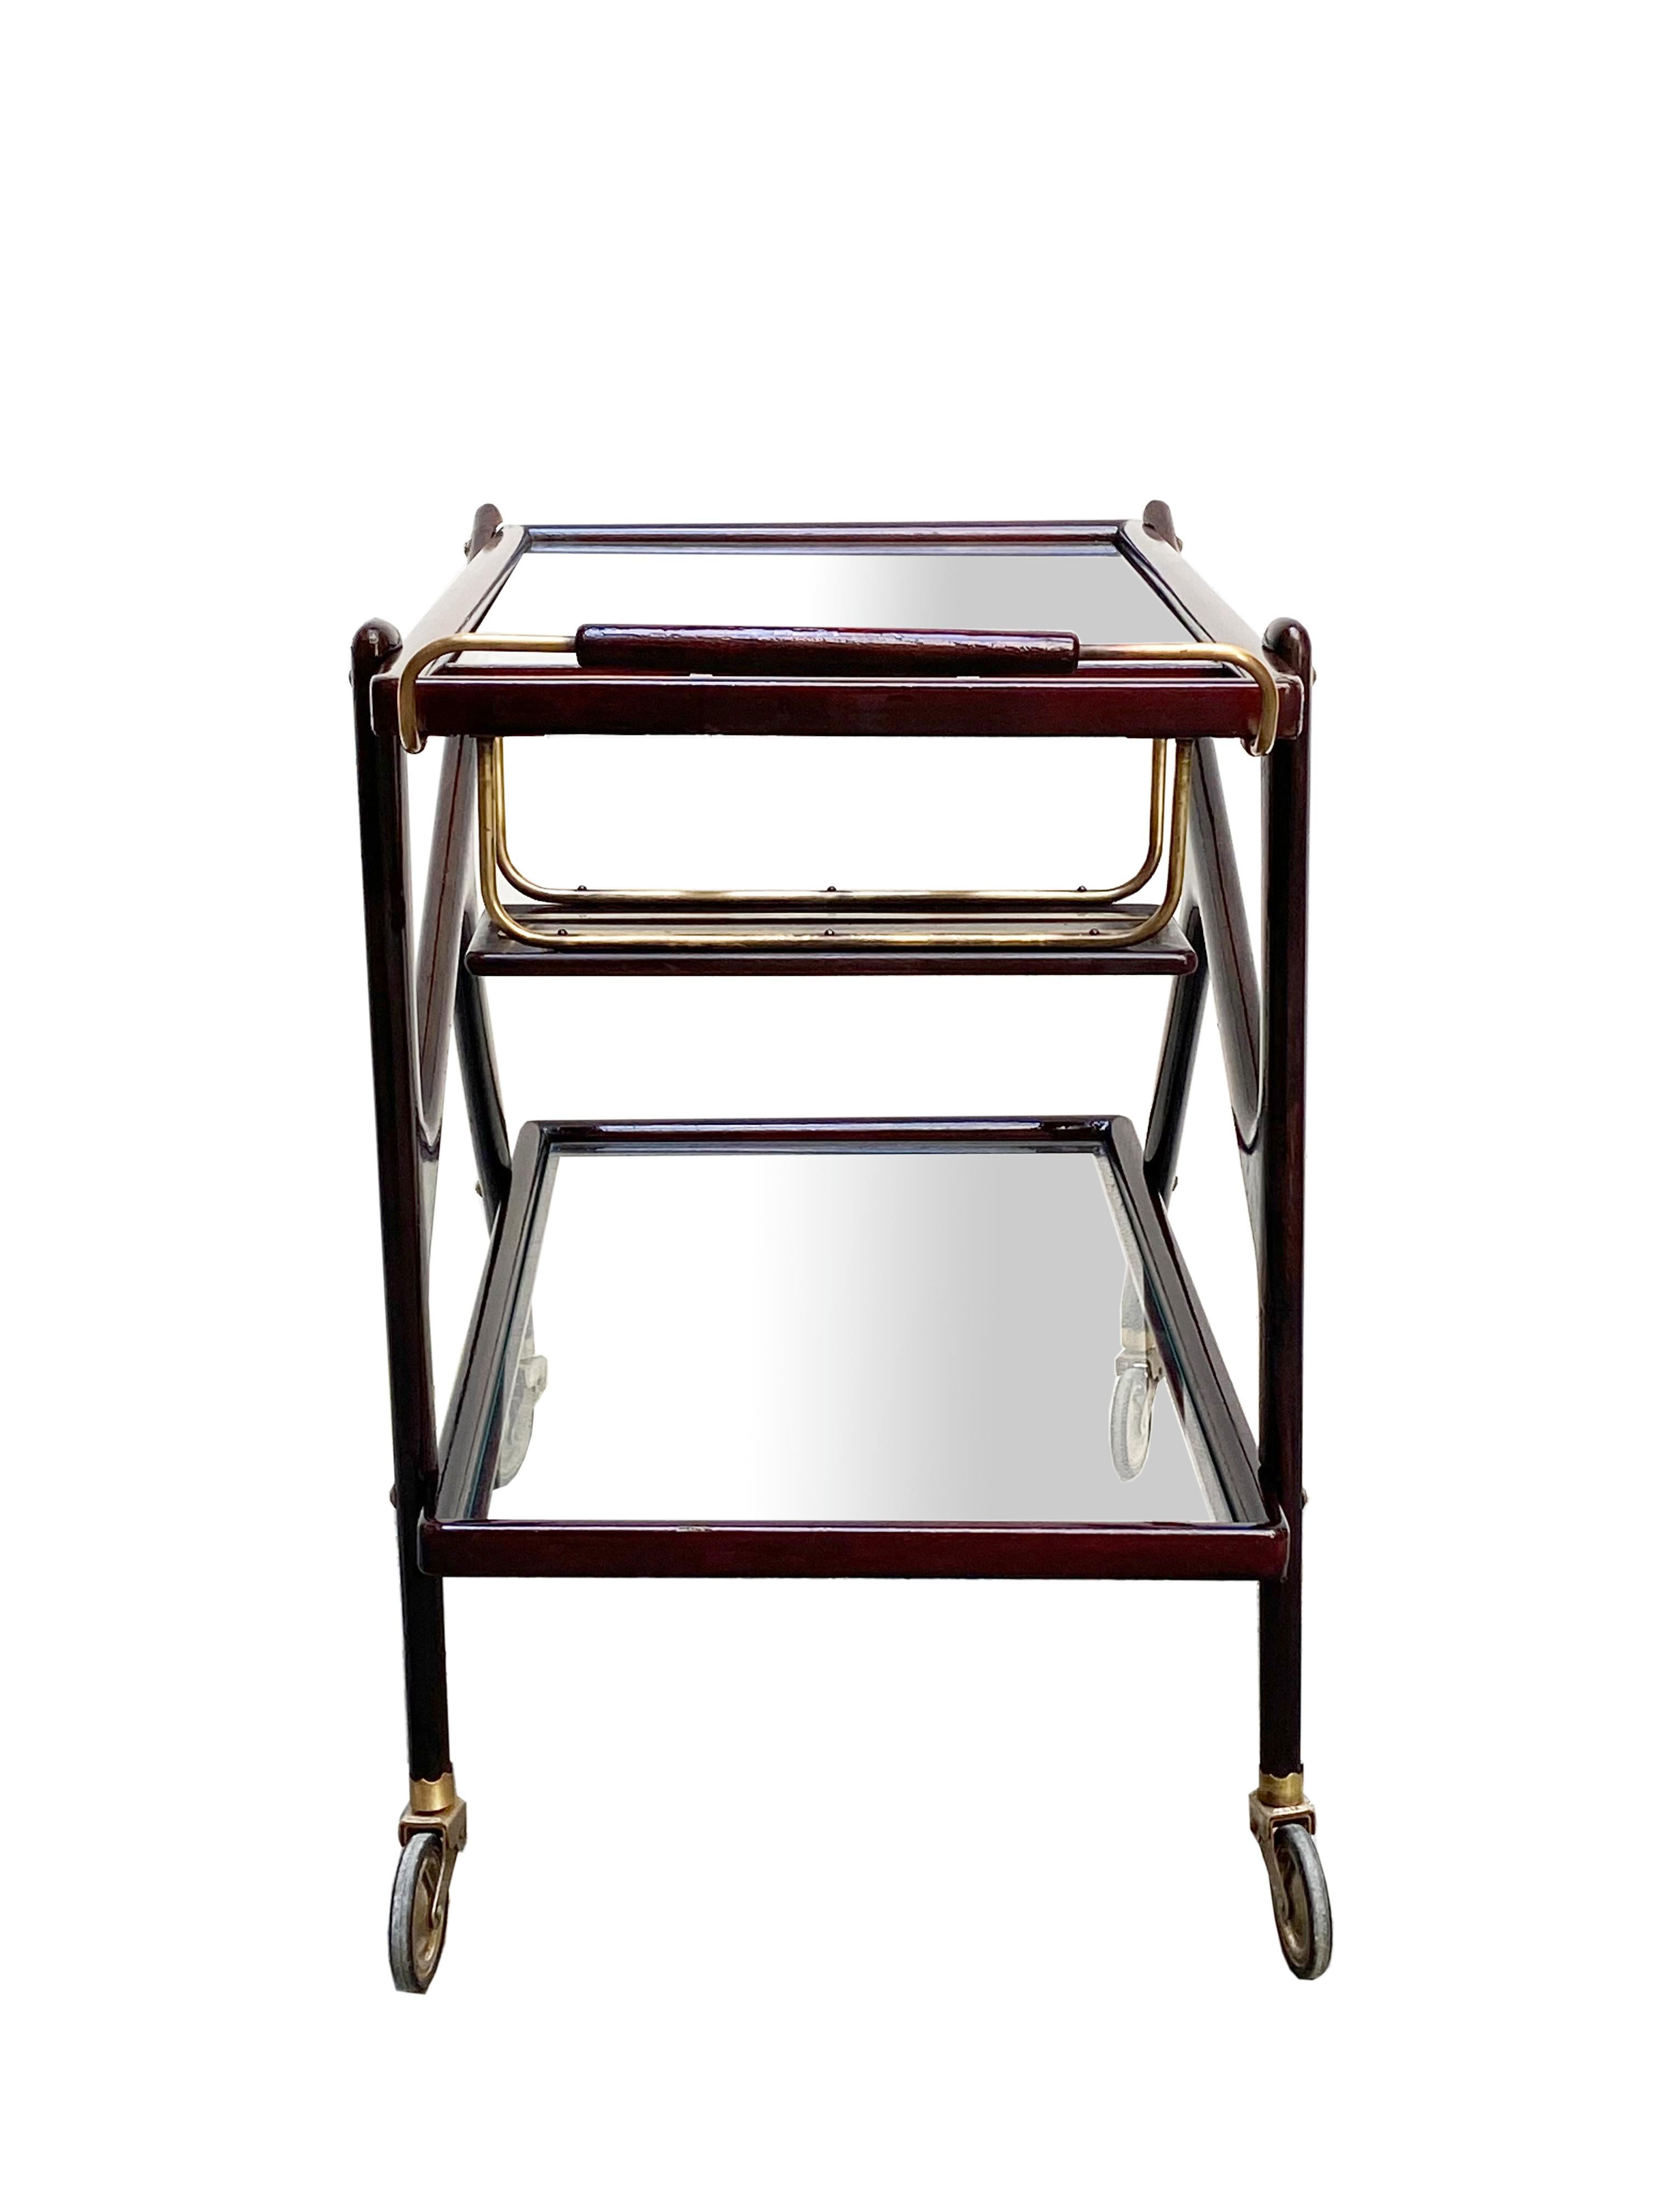 Beautiful bar trolley in mahogany and brass details by Designer Ico Parisi 1950.